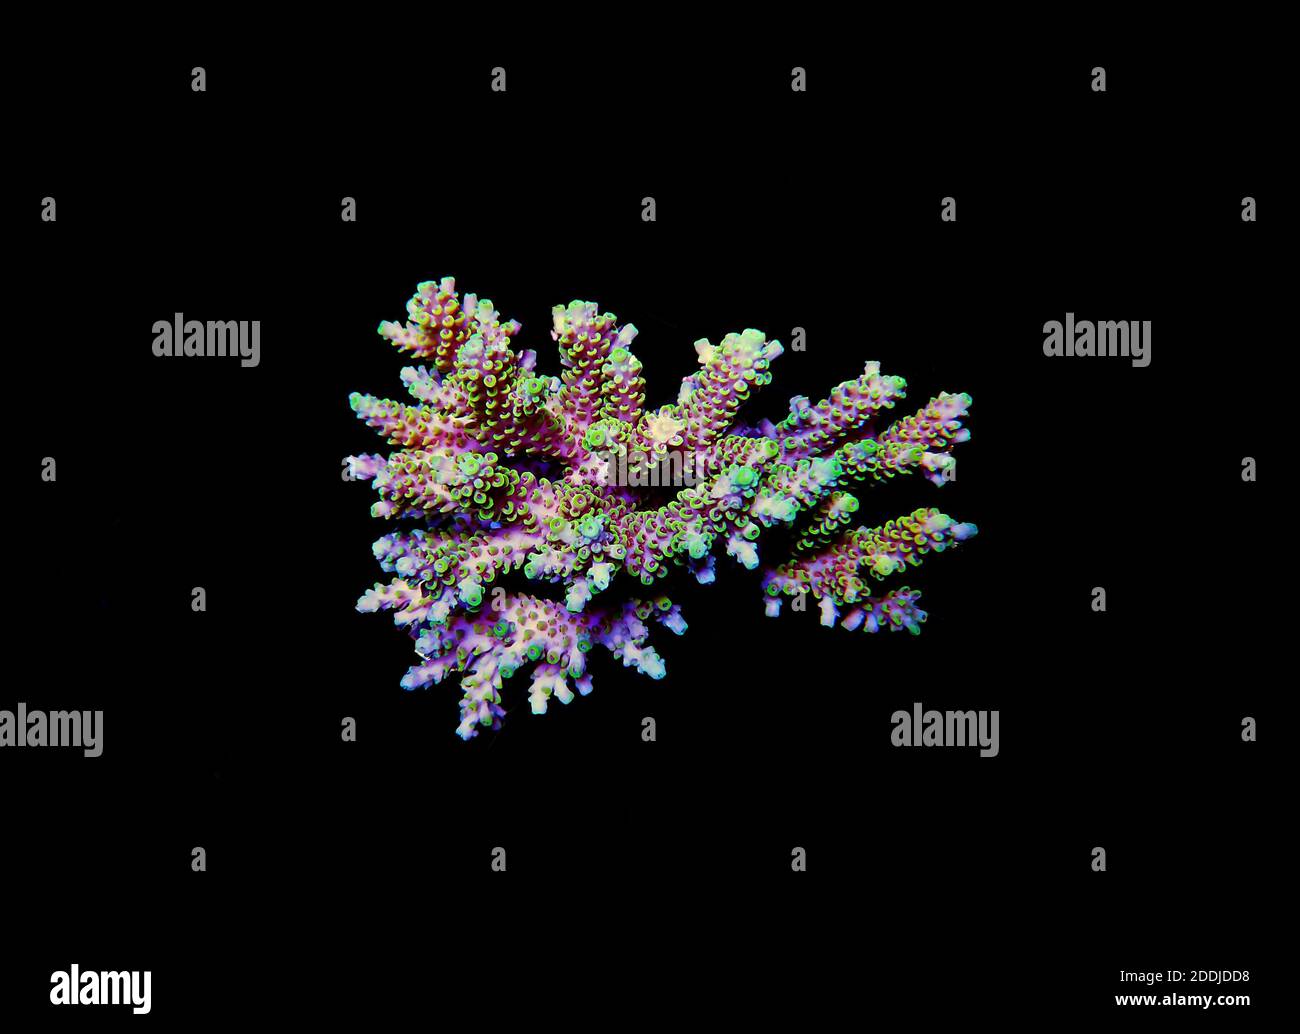 Isolated image of Acropora coral. Acropora is a genus of small polyp stony corals. Stock Photo